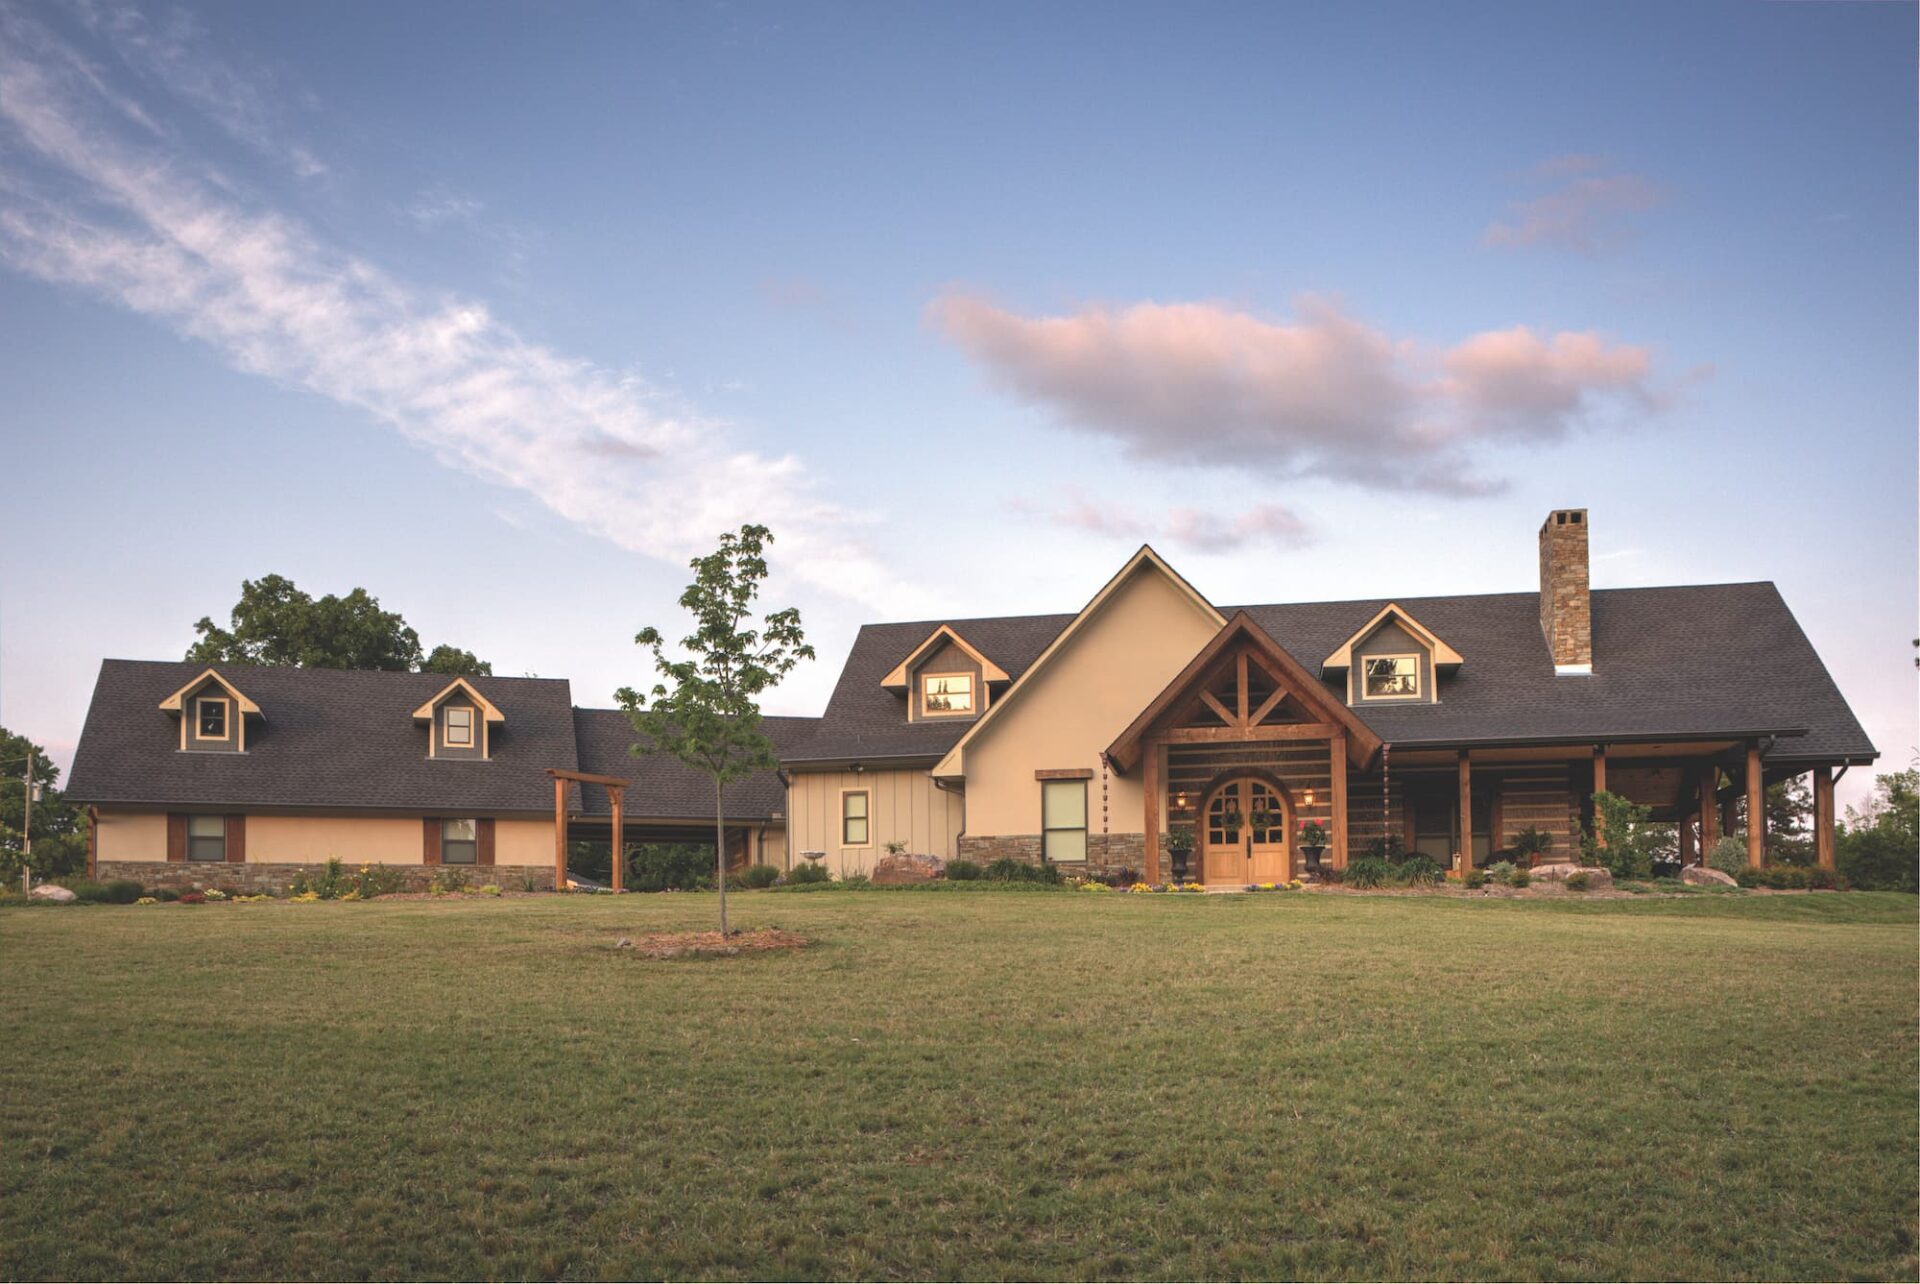 Our company creates exquisite, large brown log homes nestled beautifully in lush green fields.